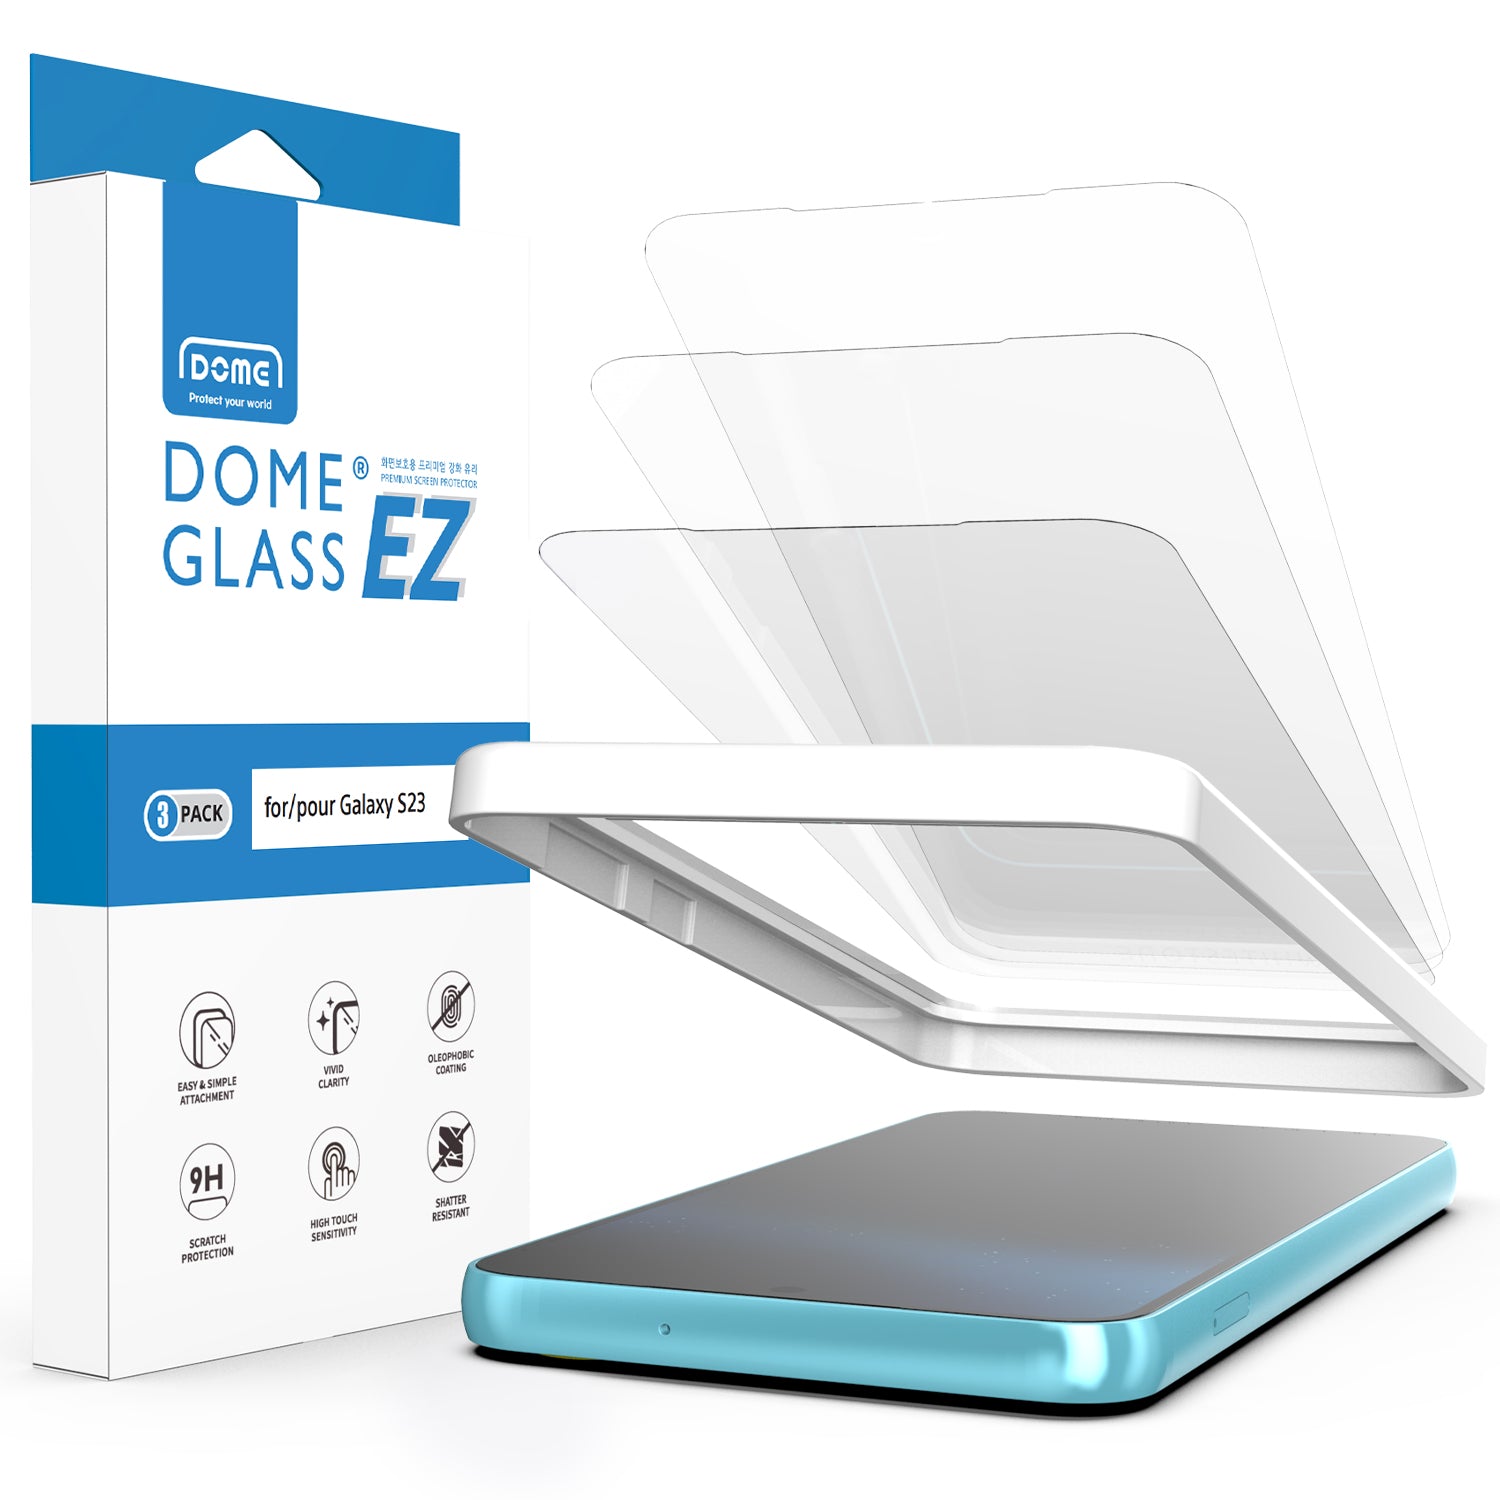 Whitestone Dome 2 Pack Tempered Glass Screen Protectors with UV Lamp - for Samsung Galaxy S23 Ultra